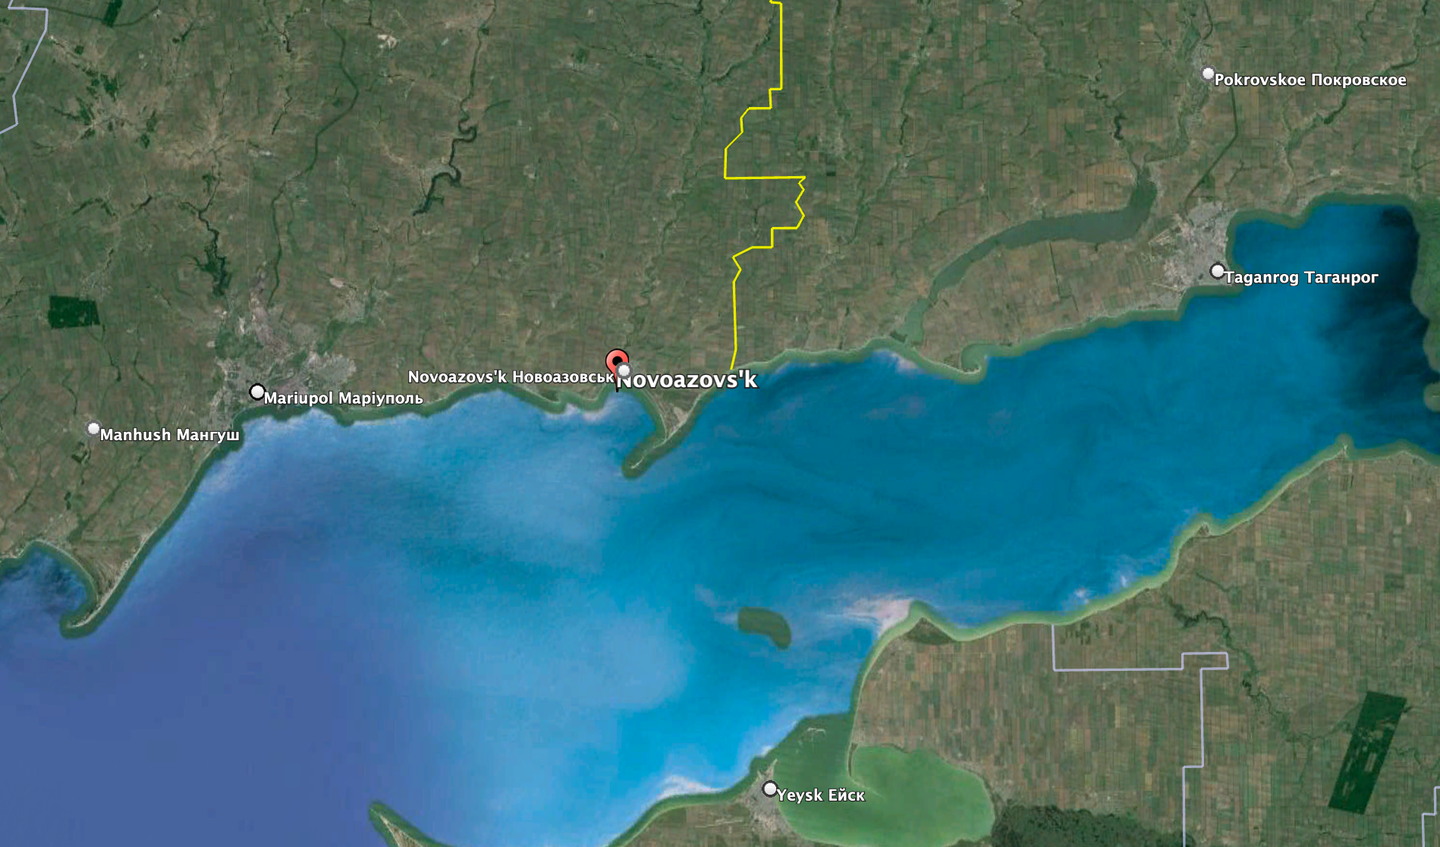 The location of Novoazovsk on the Sea of Azov, with Mariupol to the west and Taganrog to the east, on the Russian side of the border (marked here as a yellow line). <em>Google Earth</em>